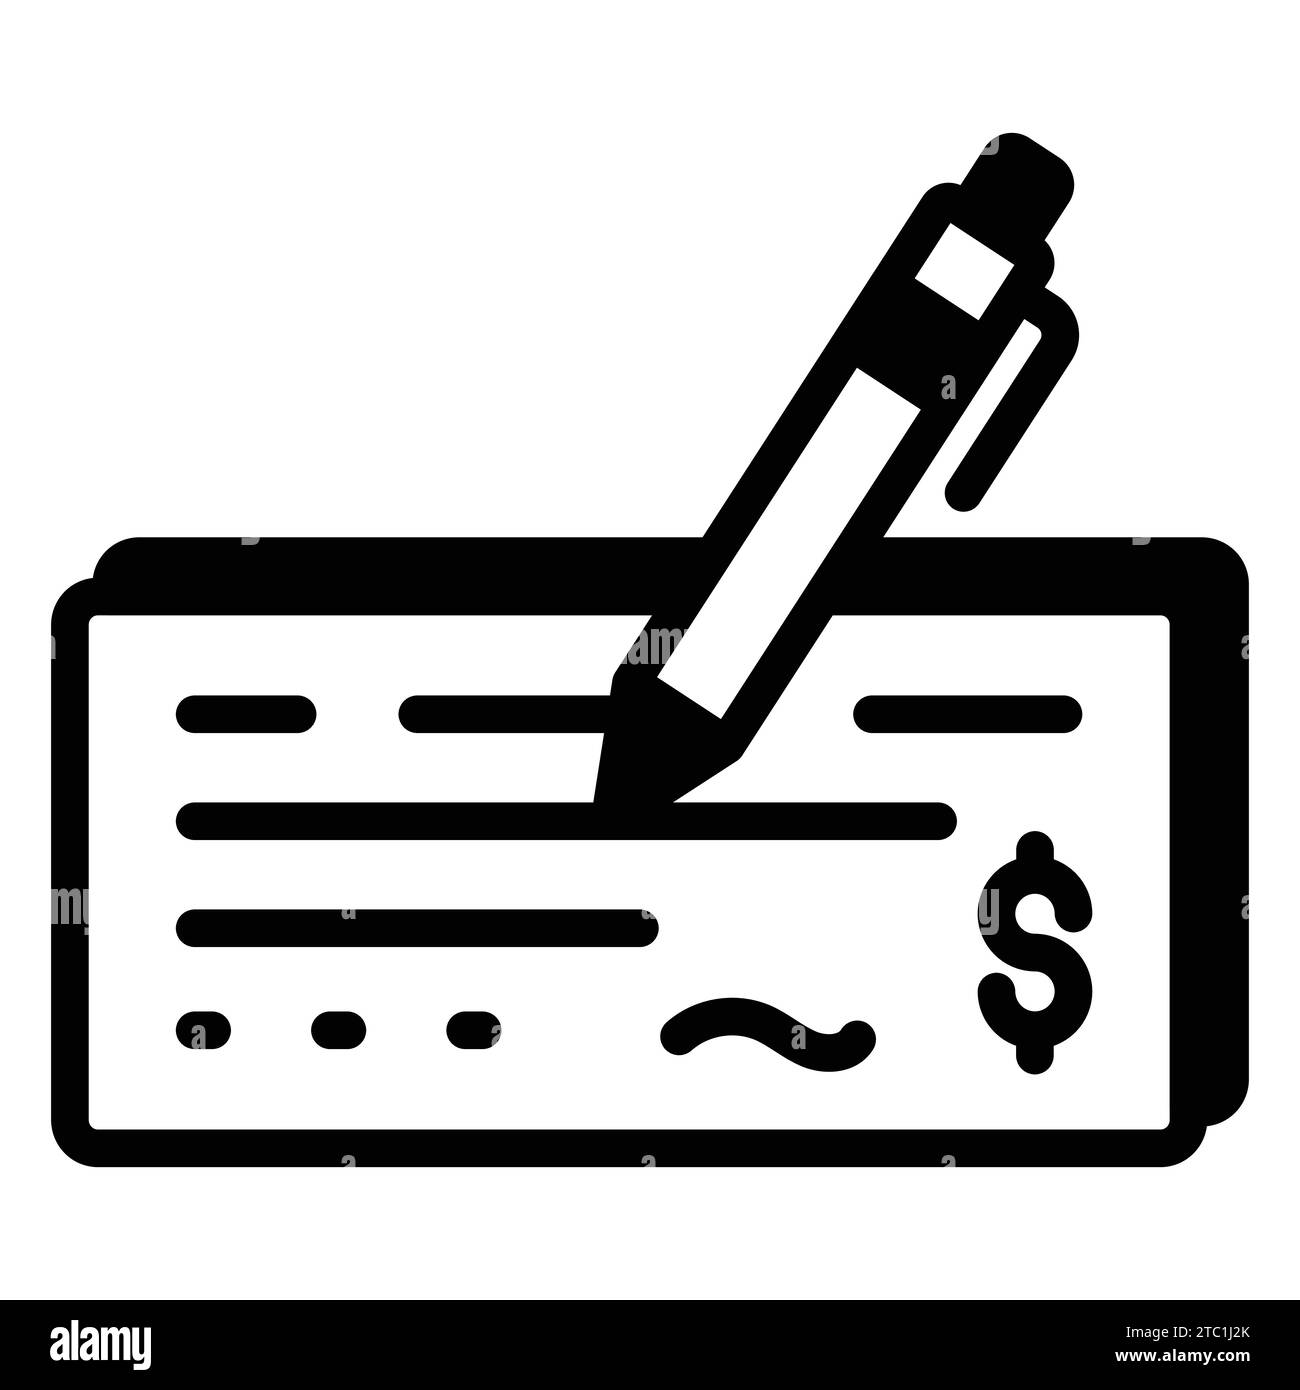 Download this premium vector of cheque in design trendy style. Stock Vector